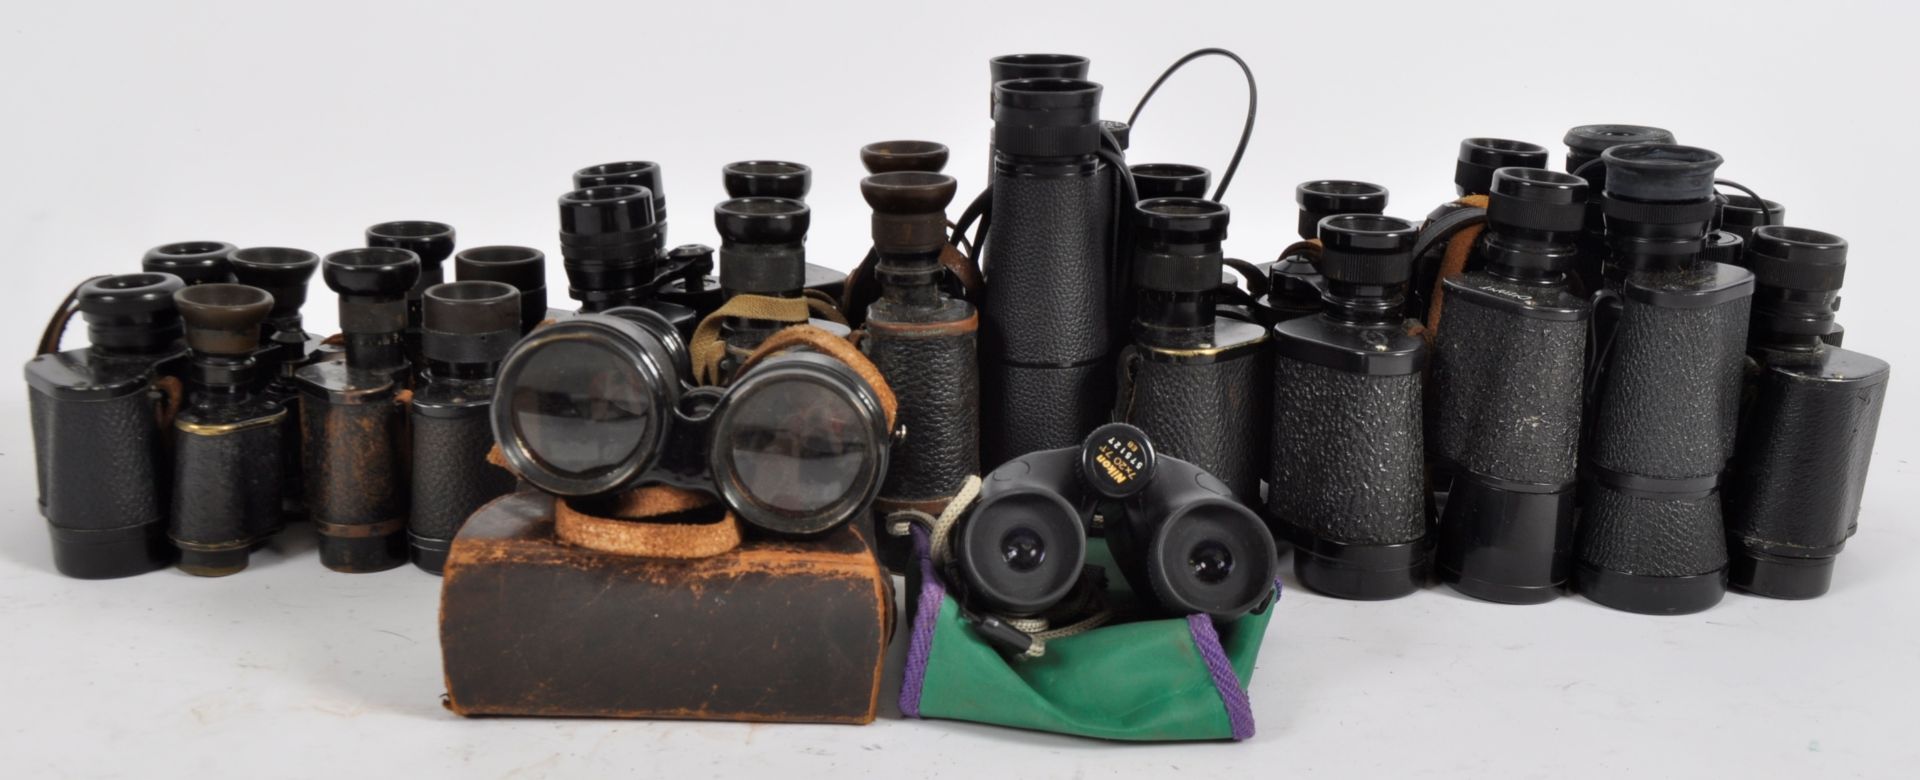 MIXED COLLECTION OF VINTAGE BINOCULARS INCLUDING MILITARY ISSUE - Image 6 of 6